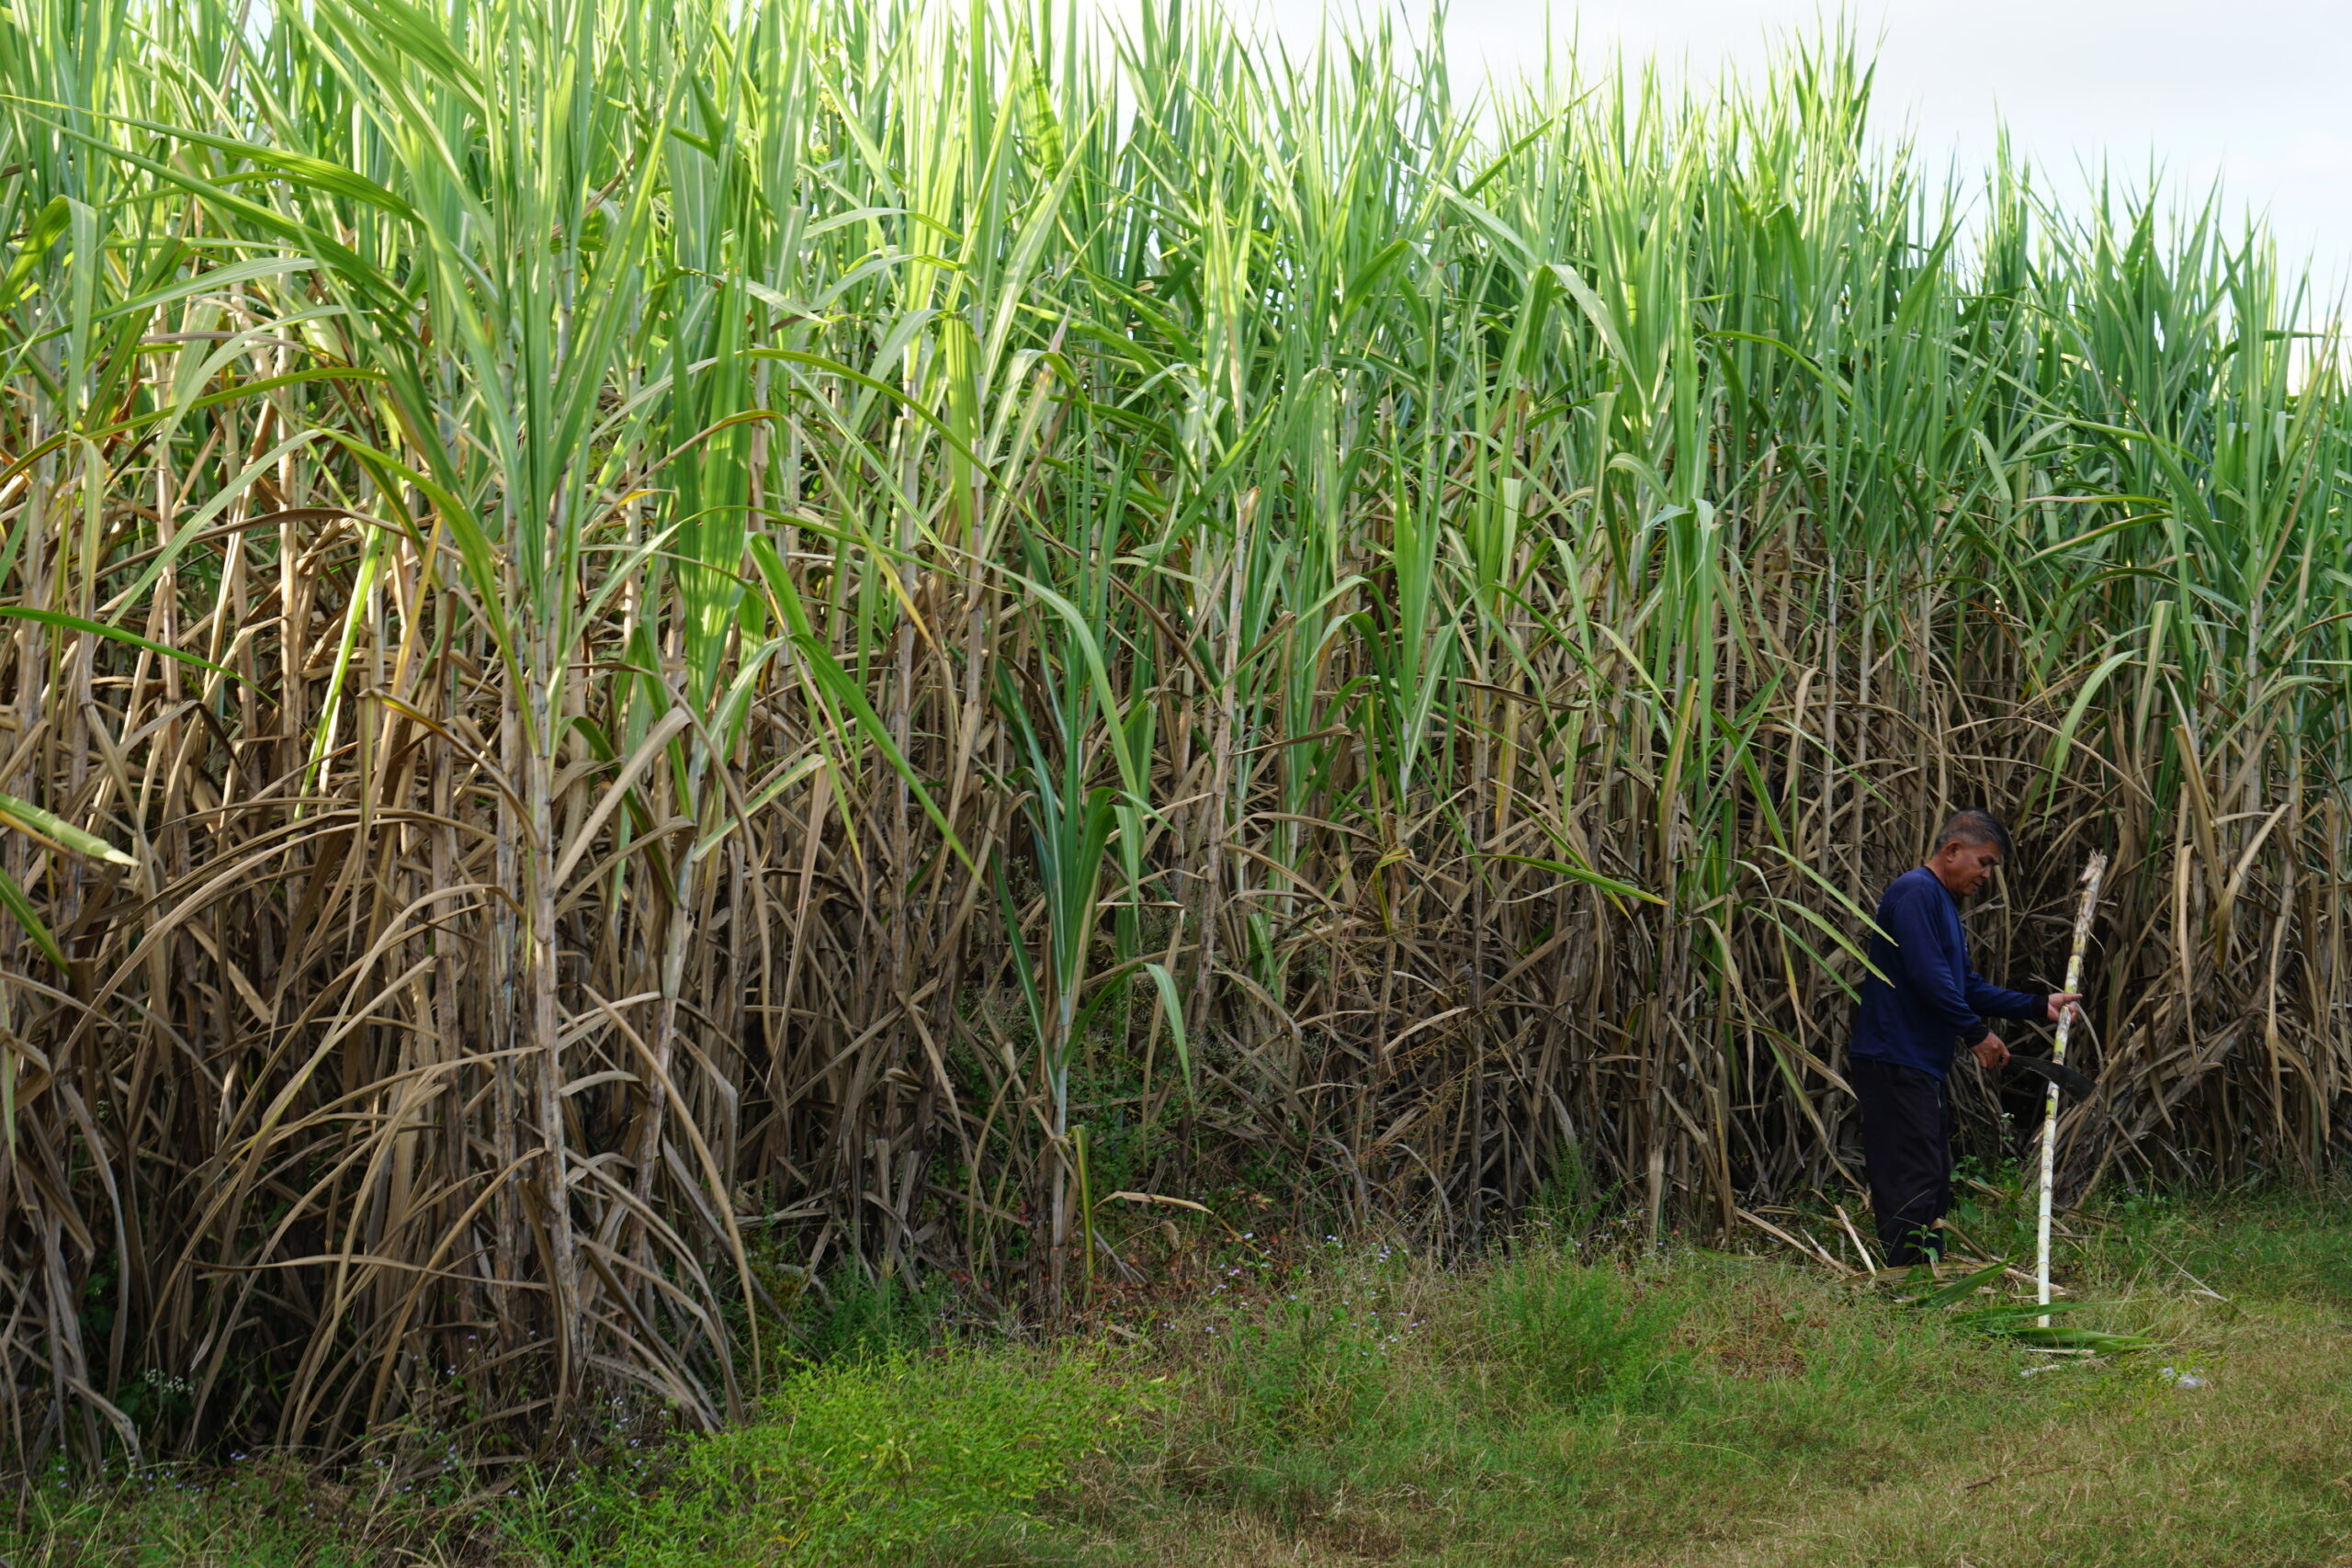 Sugarcane farmers disown govt decision on support price